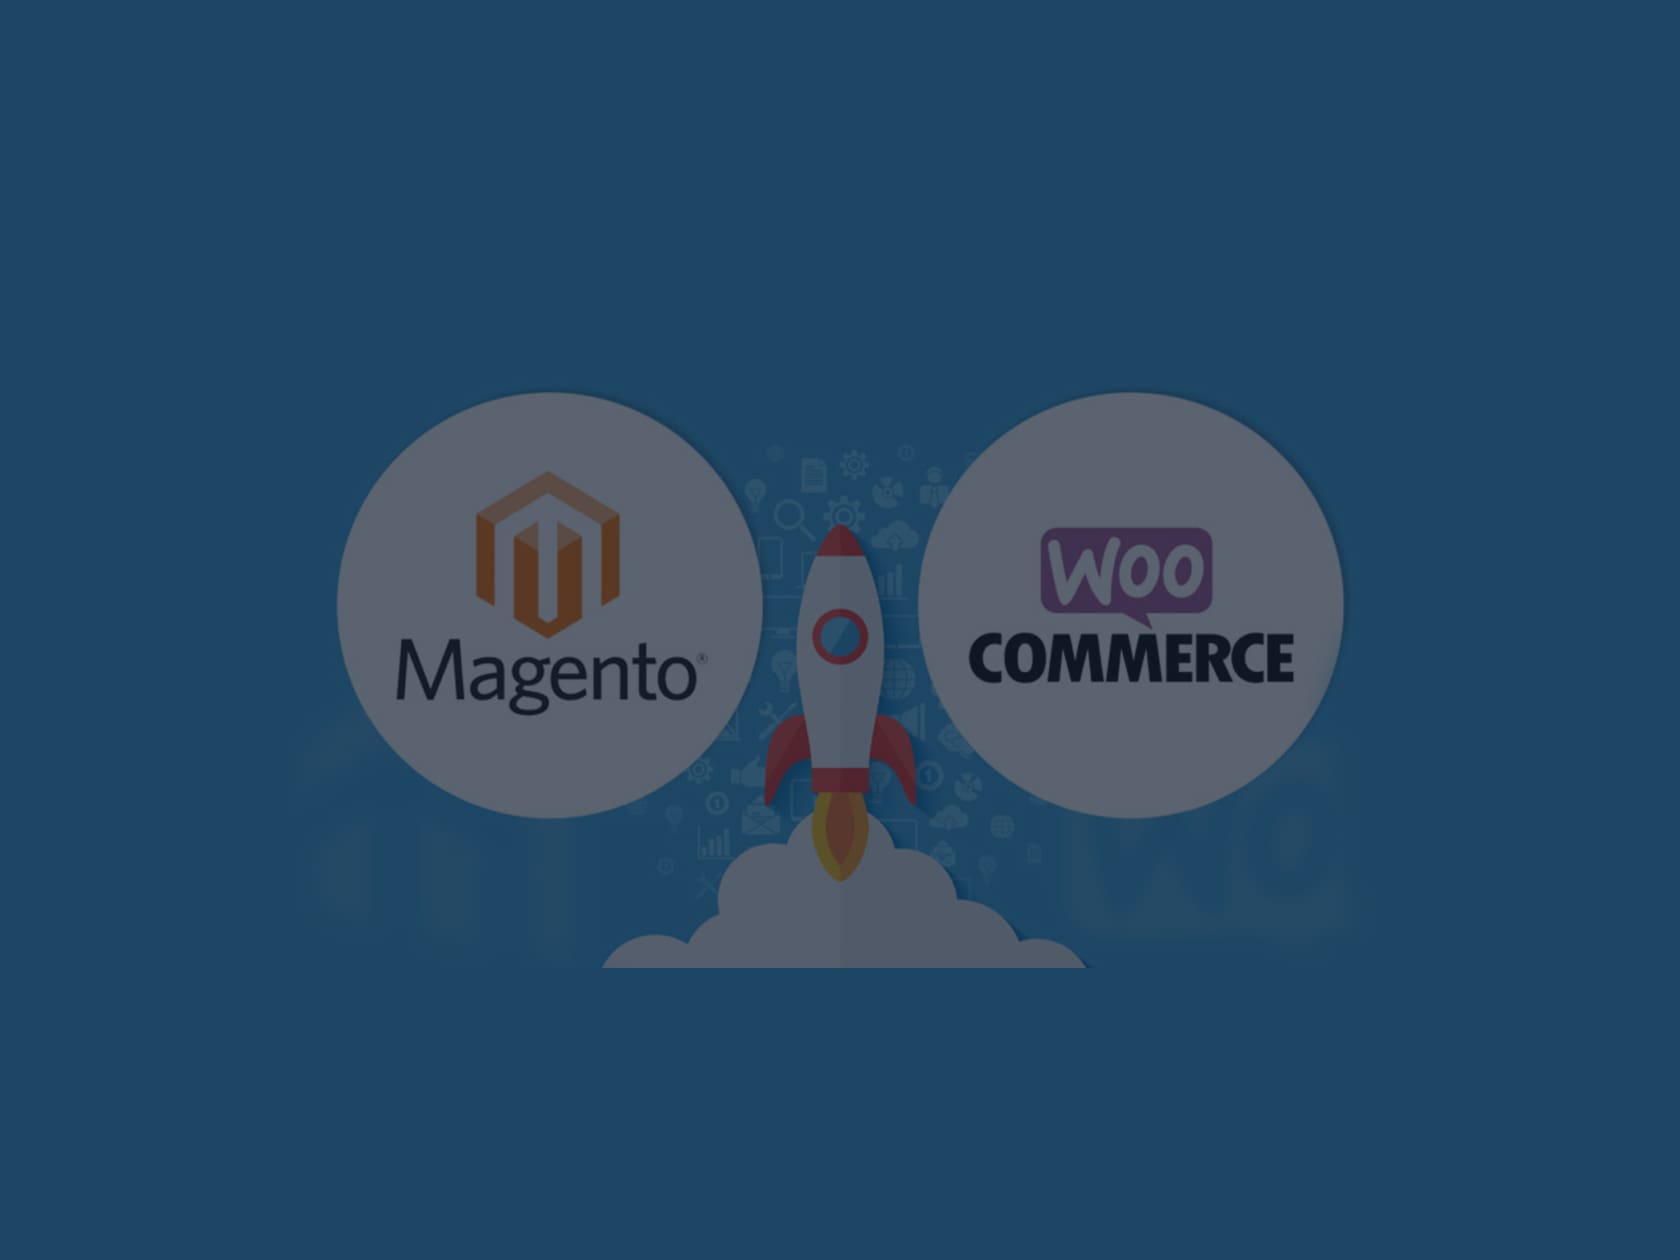 Magento or WooCommerce: which one should I go for?